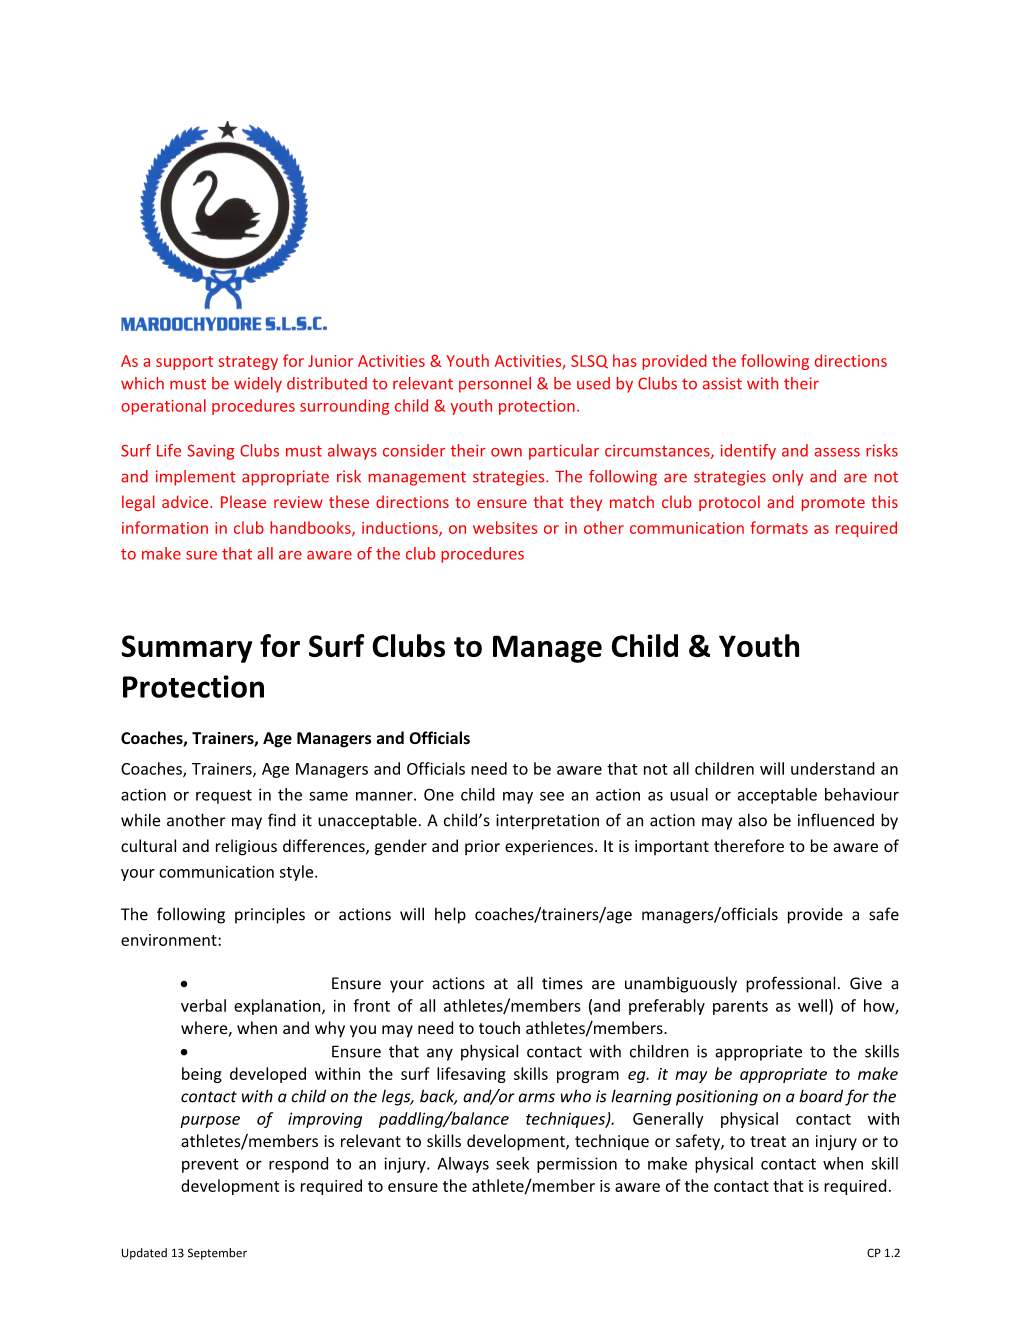 Summary for Surf Clubs to Manage Child & Youth Protection